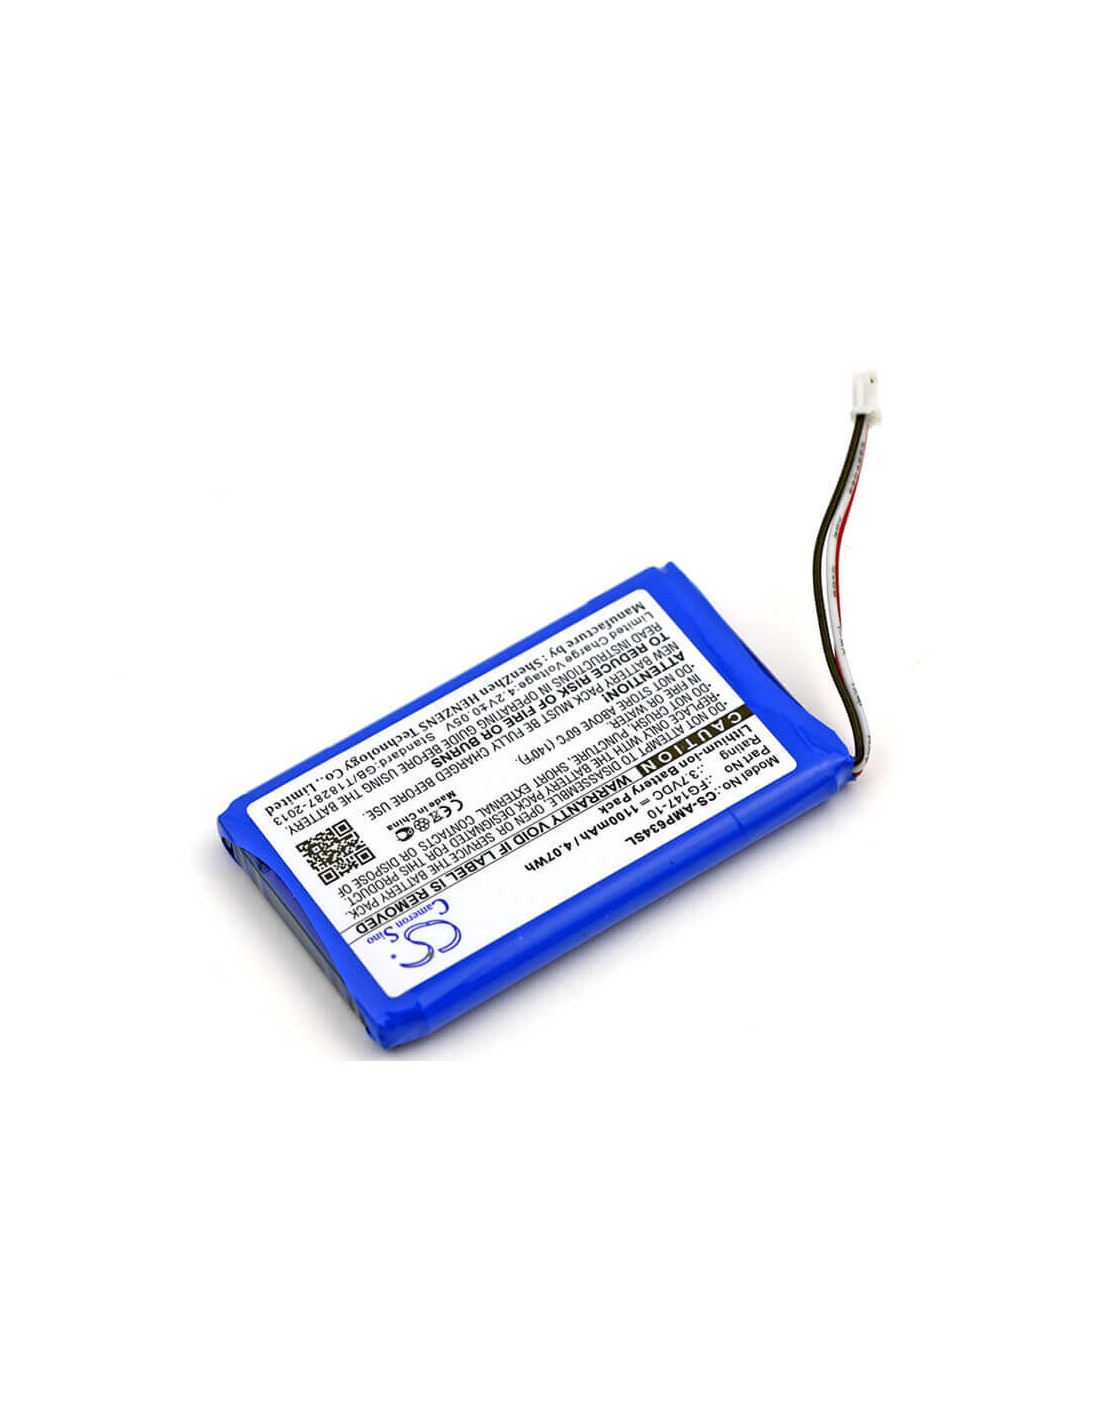 Battery for Amx, Mio Modero Remote Controls, Rs634 3.7V, 1100mAh - 4.07Wh